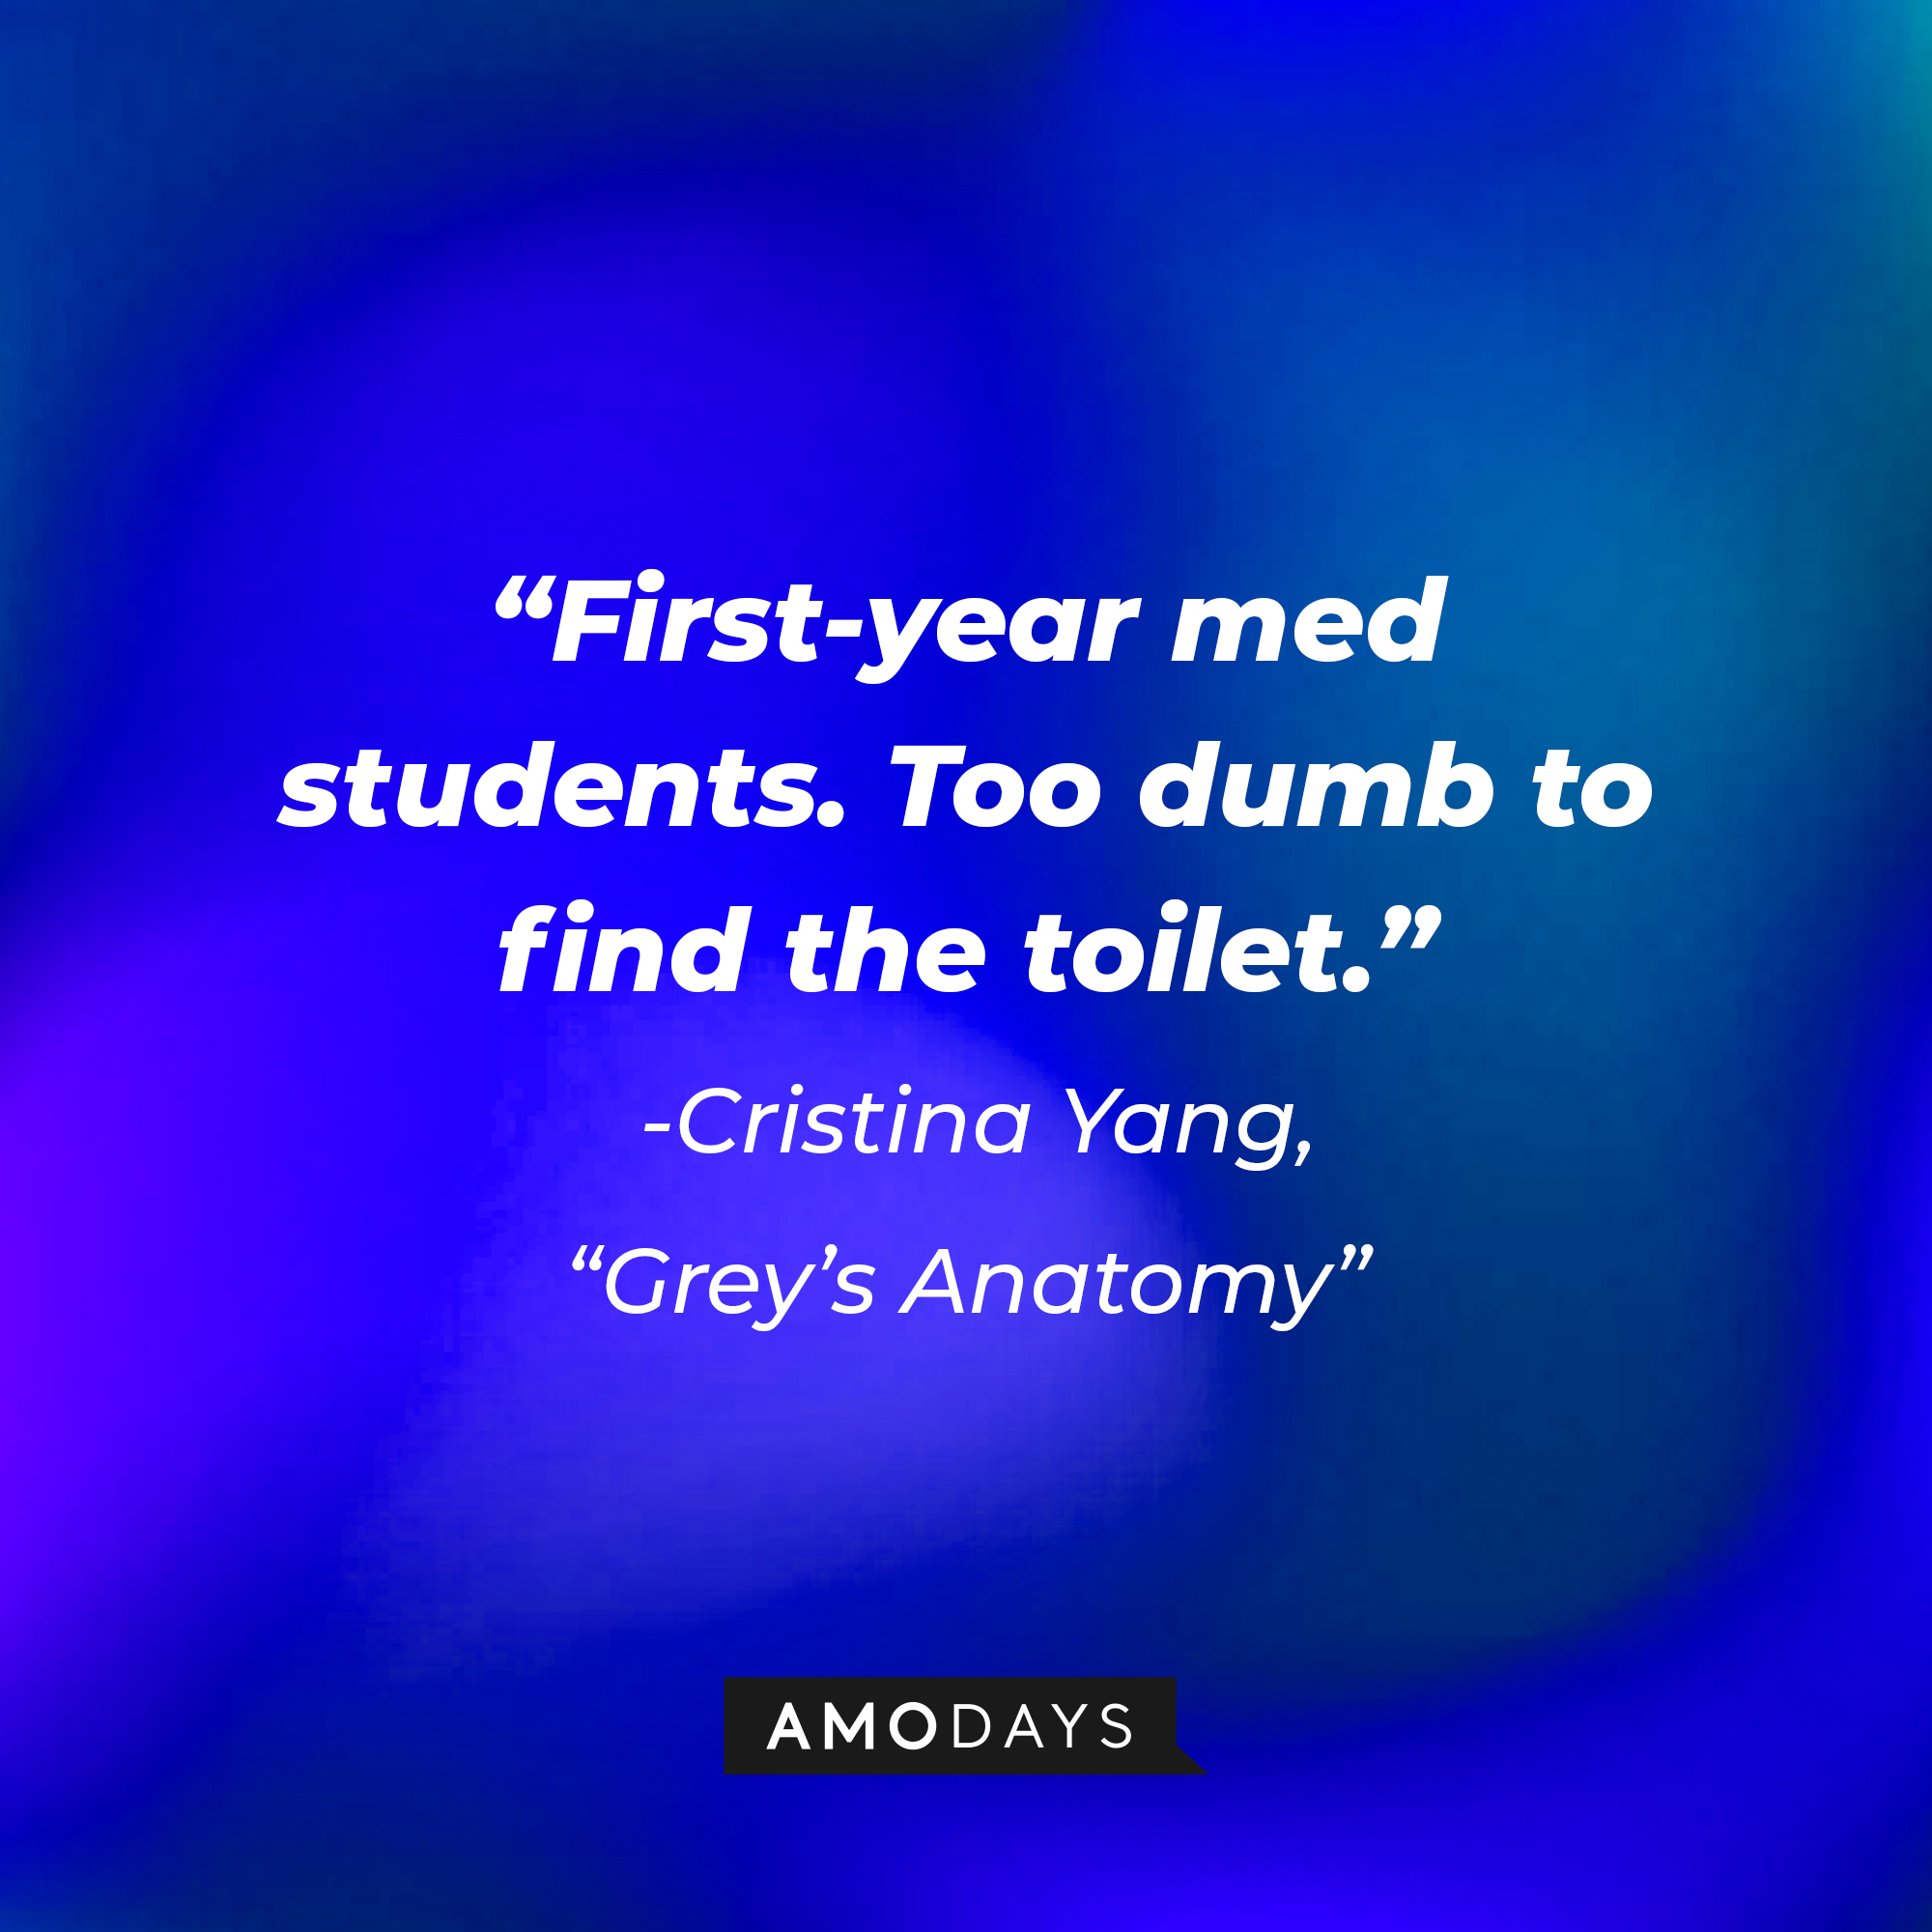 Cristina Yang's quote on "Grey's Anatomy:" “First-year med students. Too dumb to find the toilet.” | Source: AmoDays